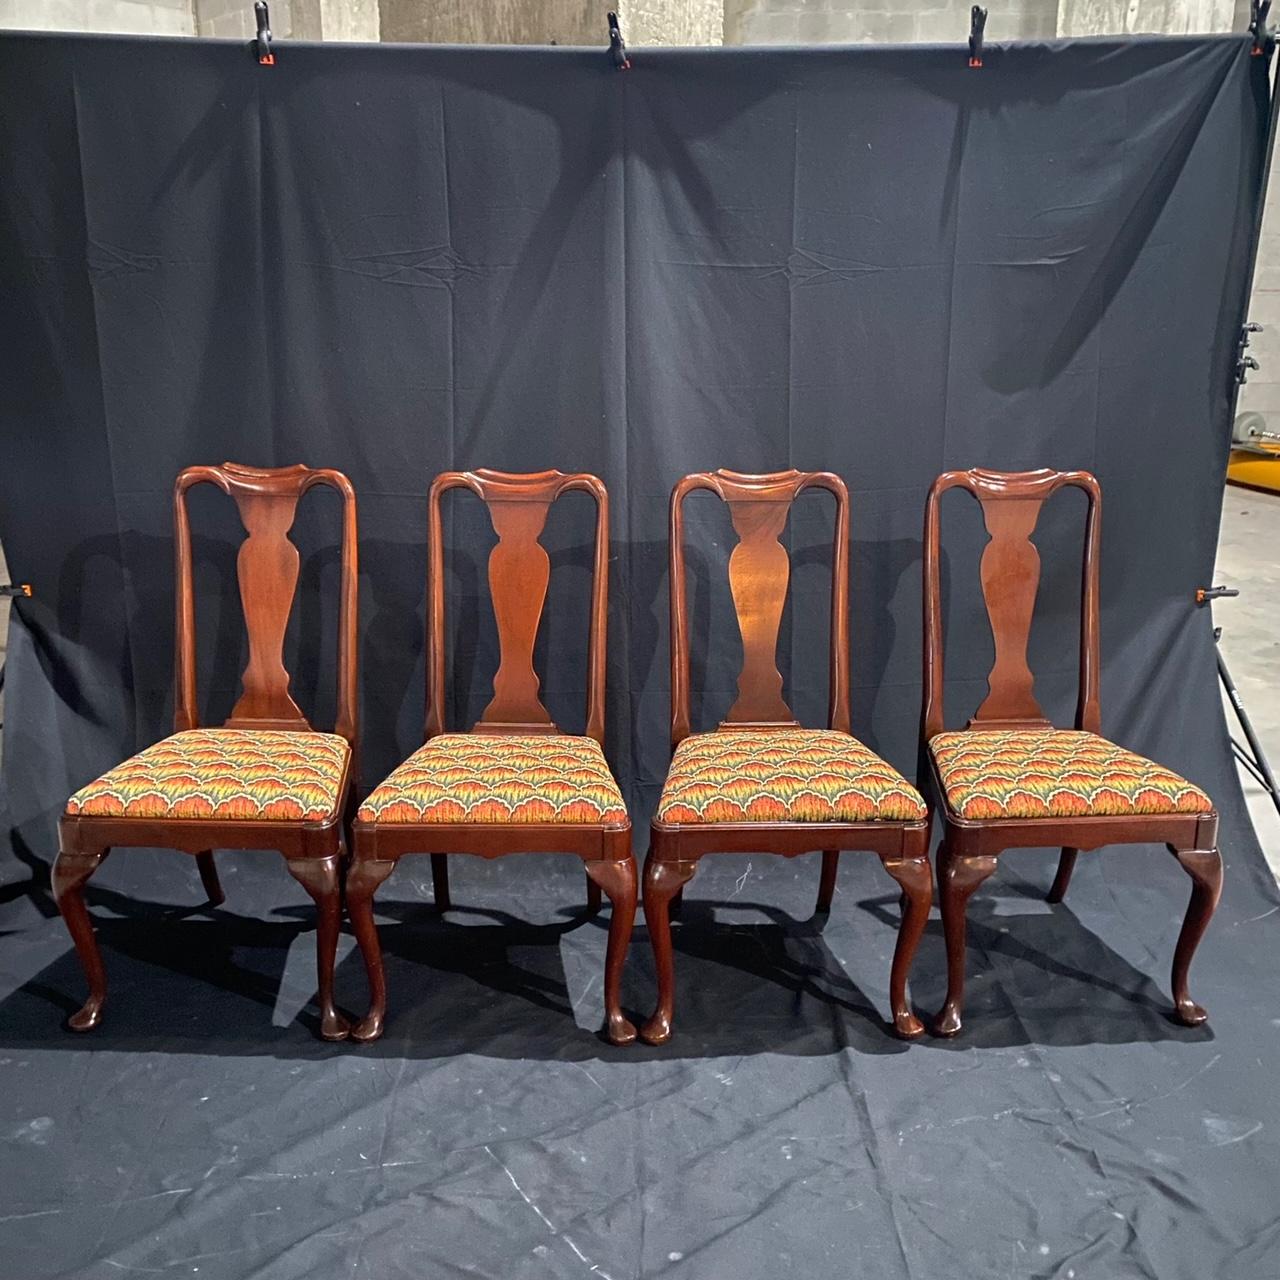 Upholstery Set of 4 Antique Queen Anne Mahogany Dining or Side Chairs